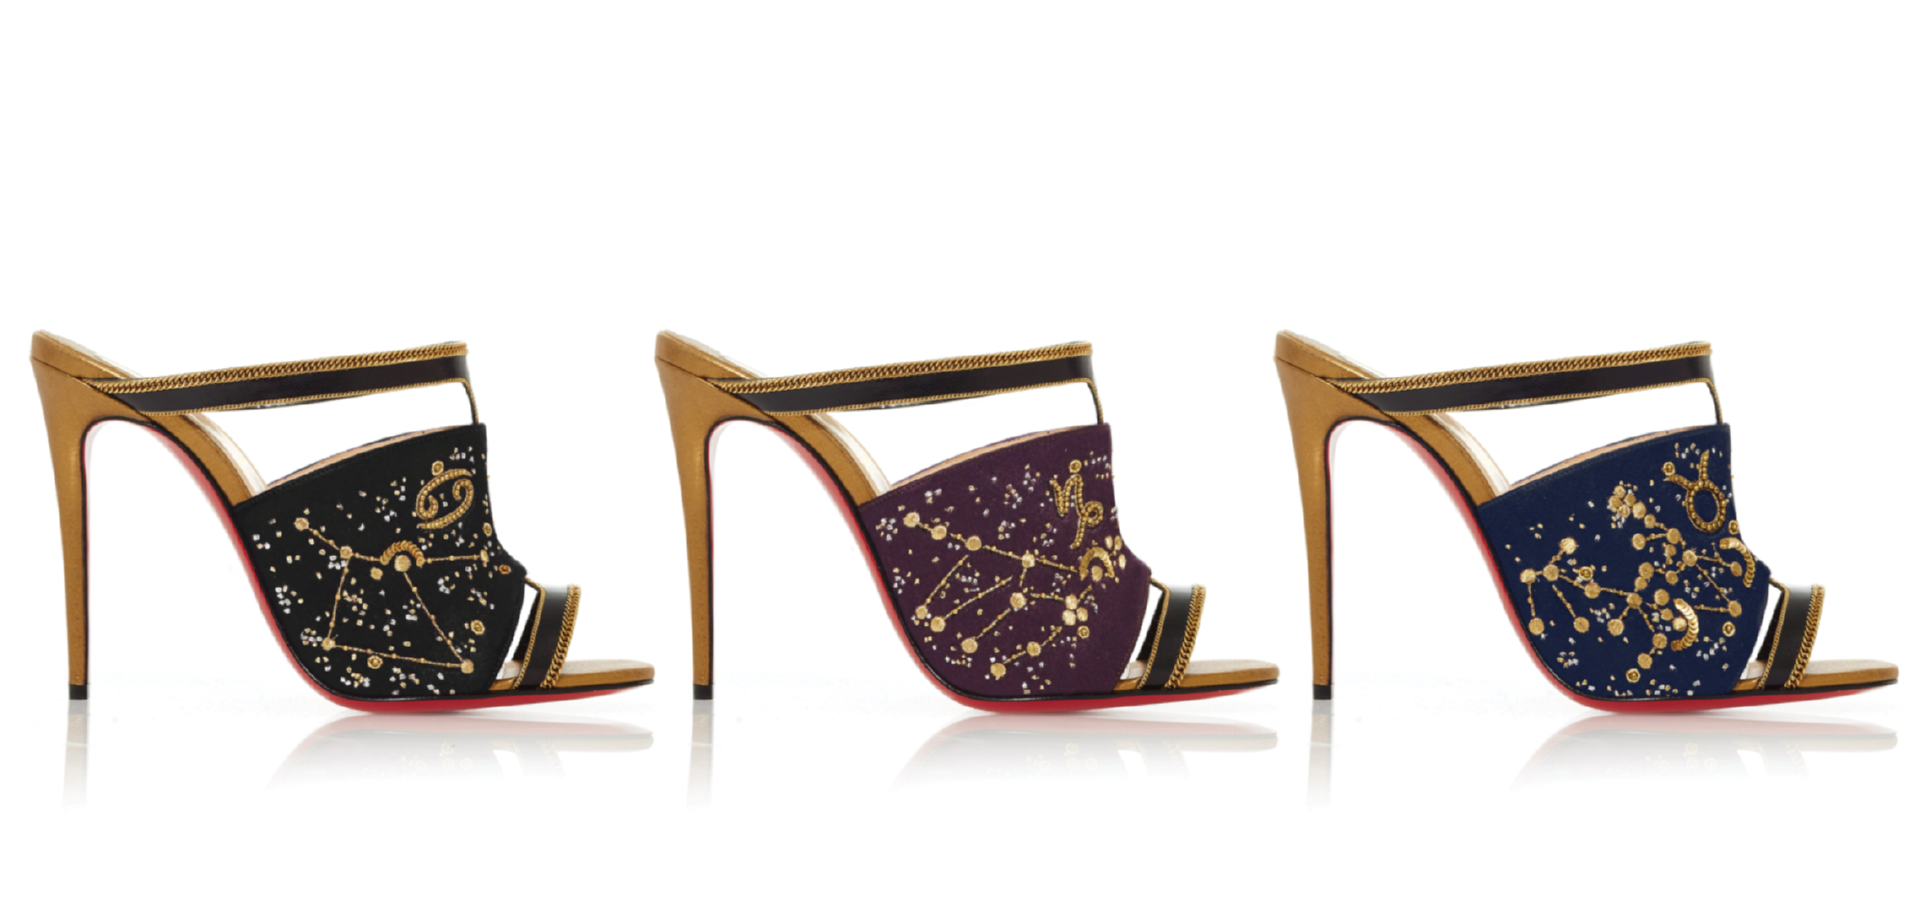 Christian Louboutin Designs Marvel-Inspired Shoe for Charity (Exclusive)